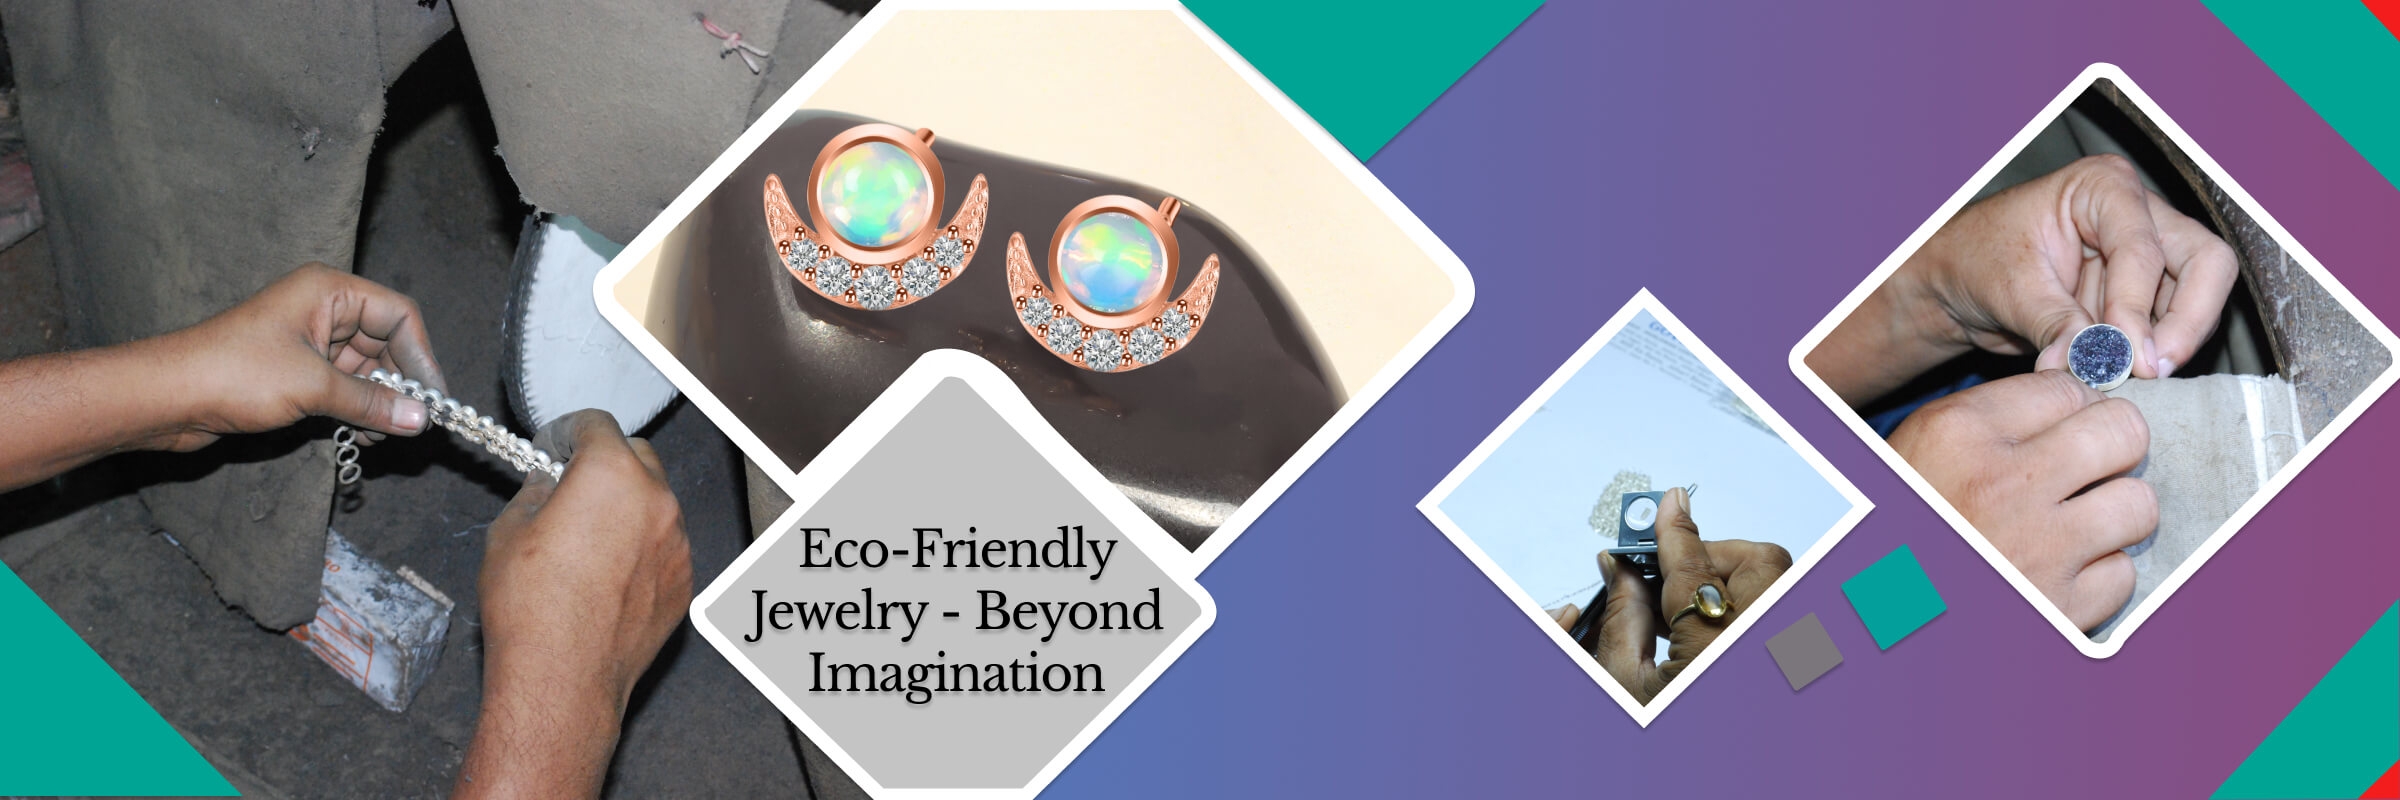 Sustainability and Beyond Imagination Jewelry